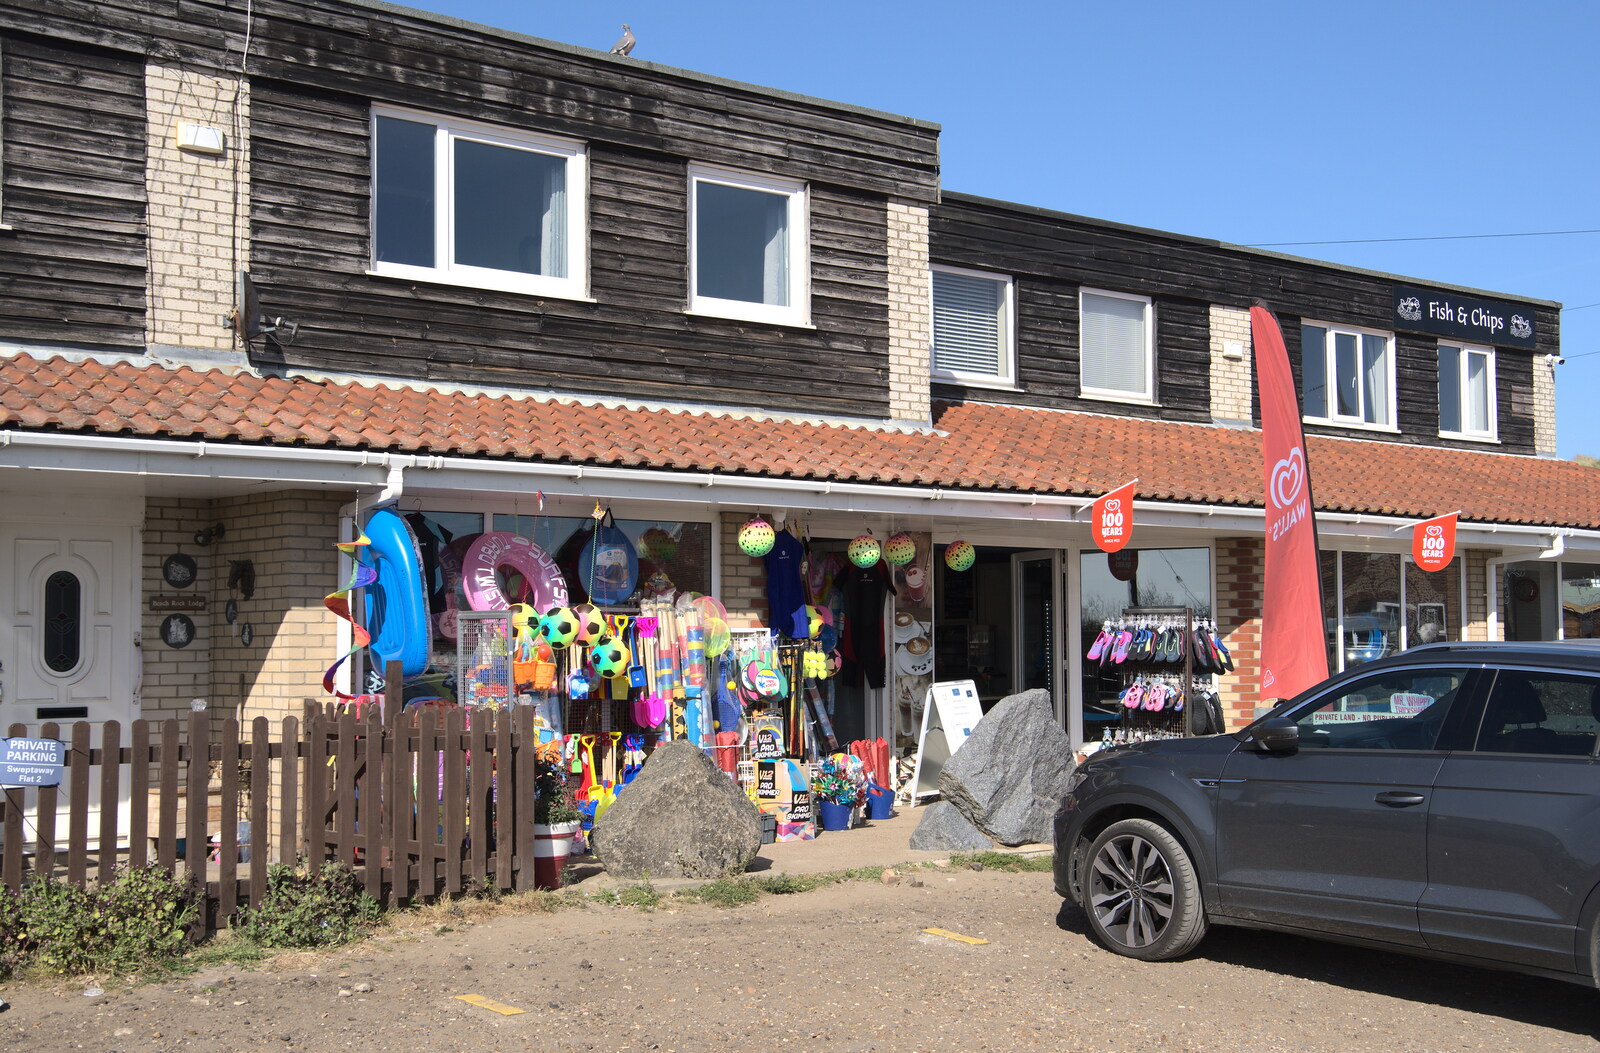 A beach tat shop in an 80s building block from On the Beach at Sea Palling, Norfolk - 8th May 2022